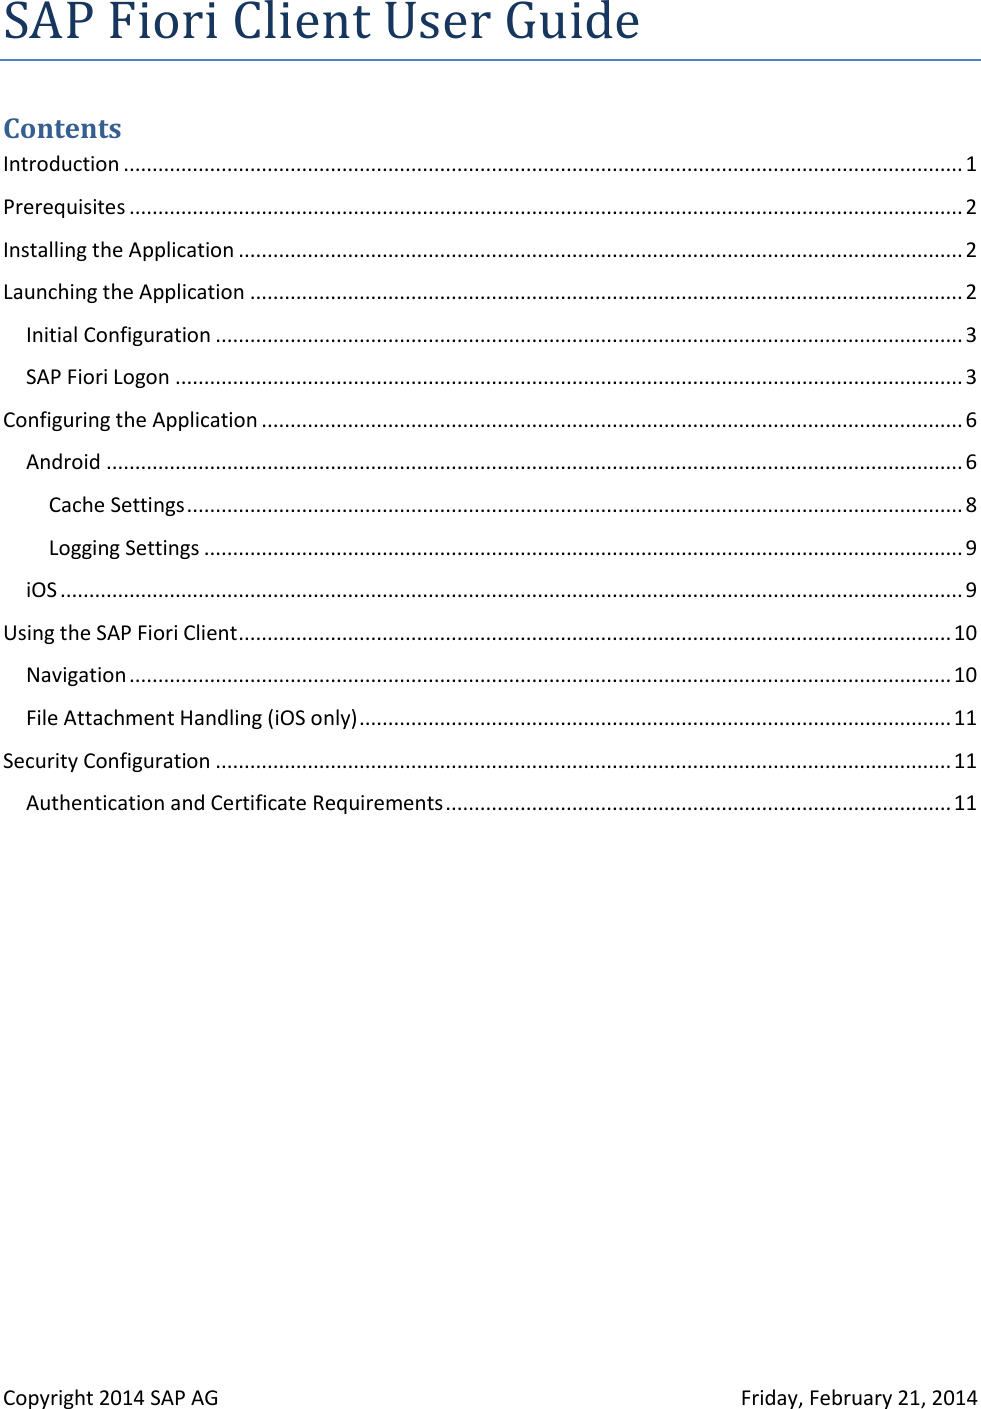 Page 1 of 12 - SAP Fiori Client User Guide